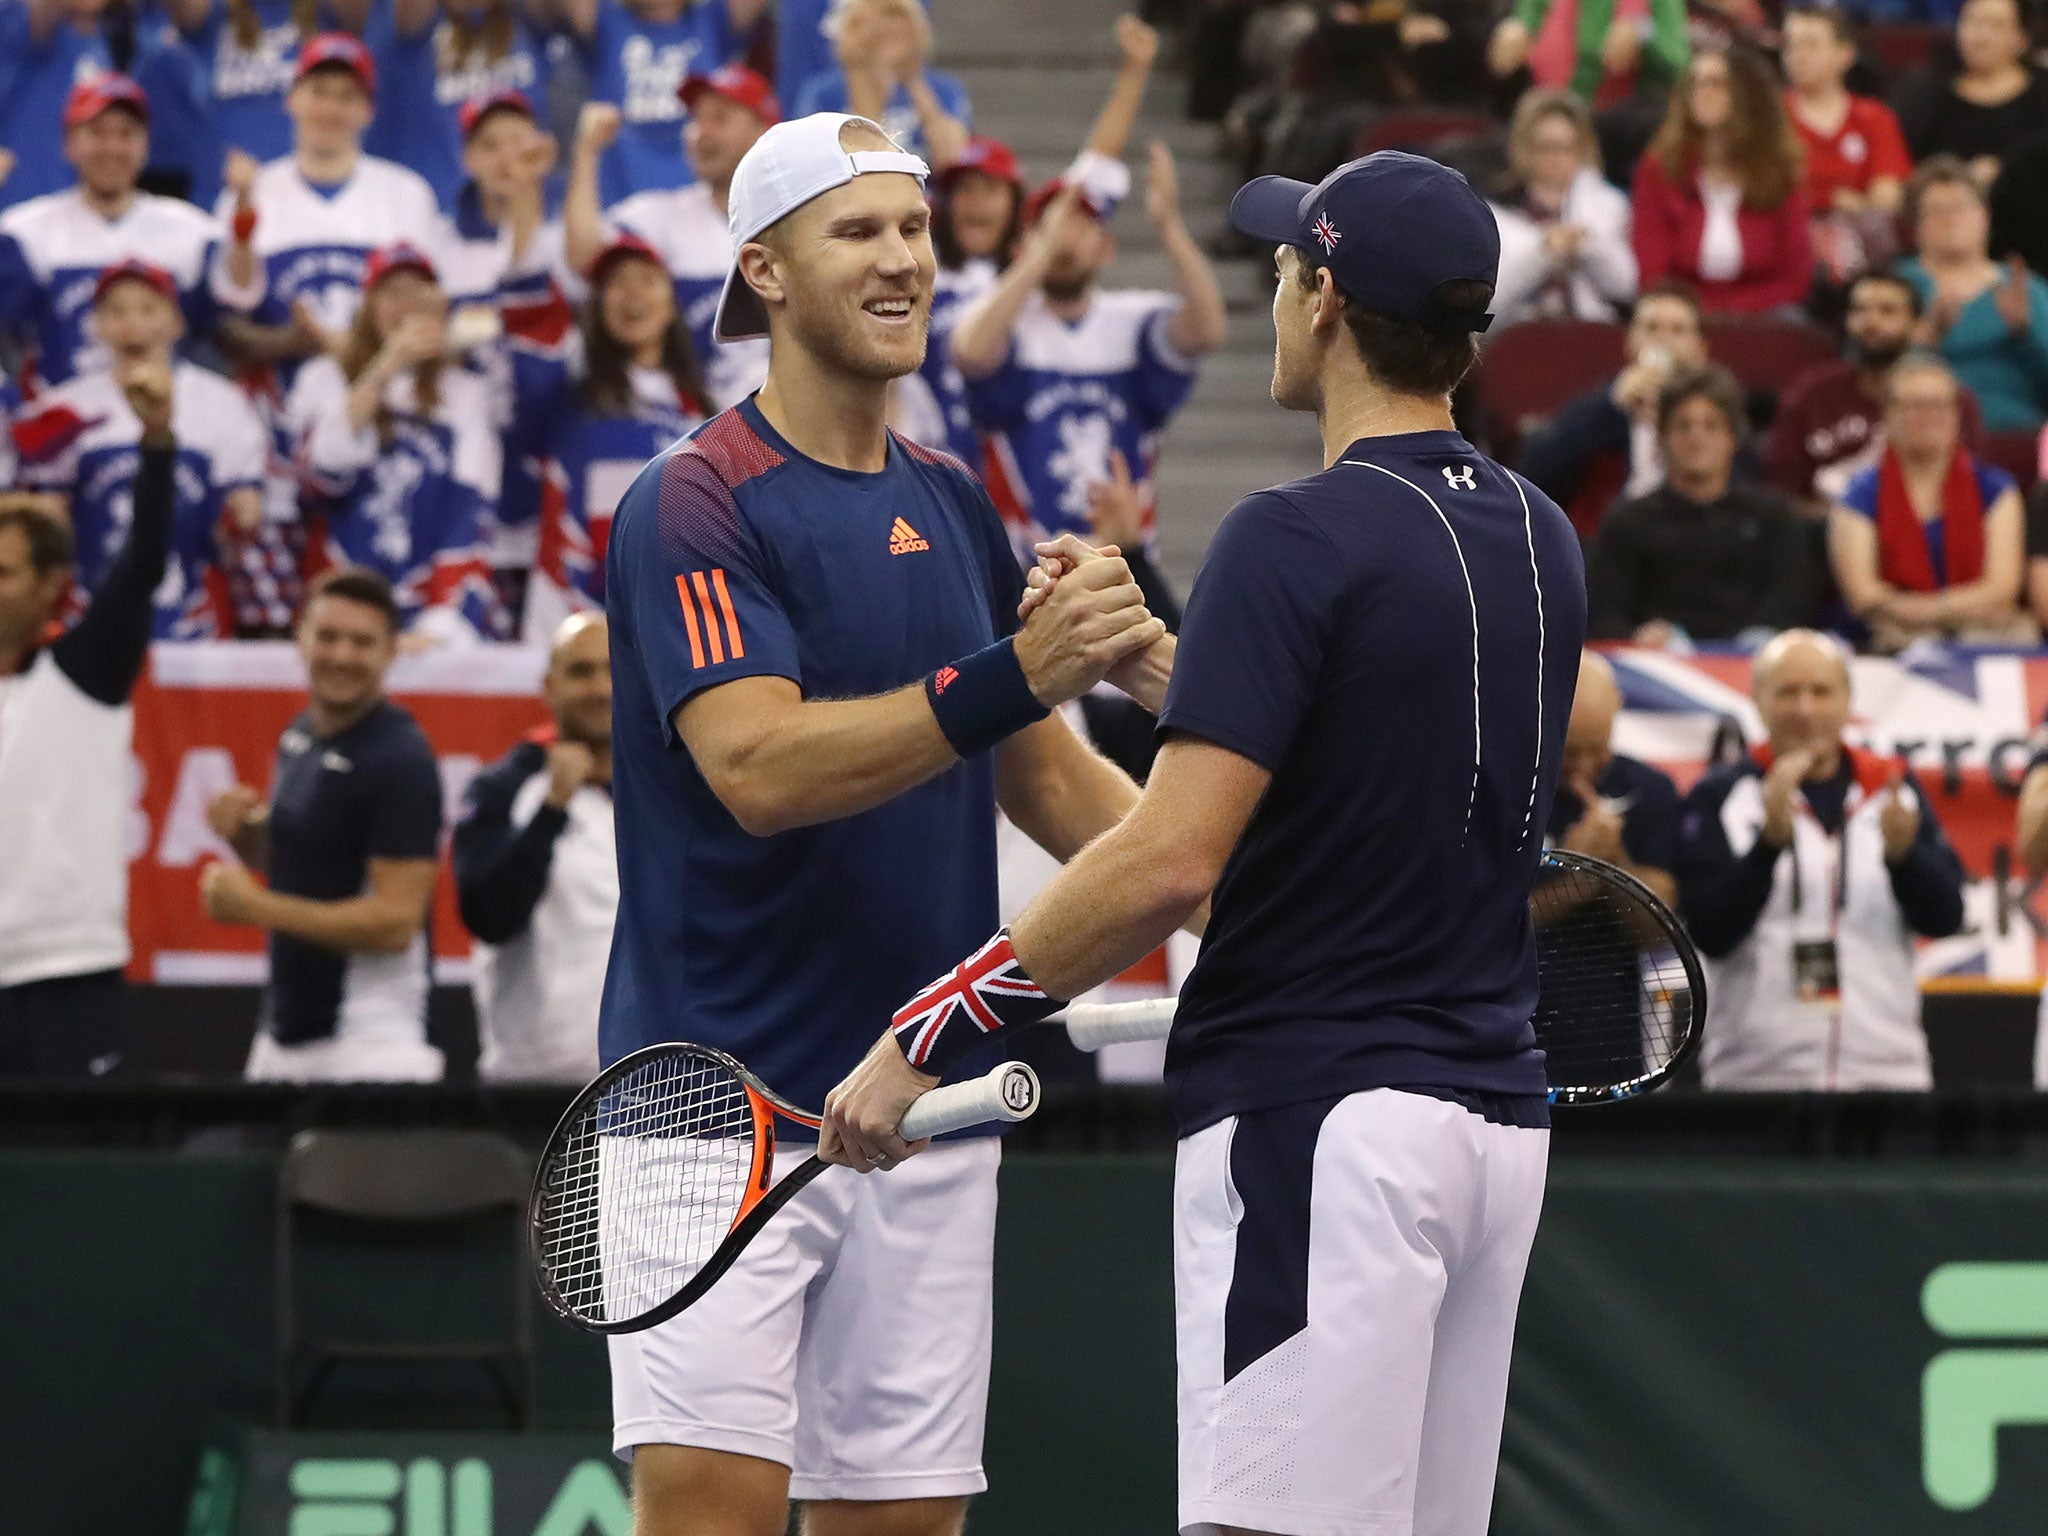 Dom Inglot and Jamie Murray won Britain's Davis Cup doubles encounter against Canada